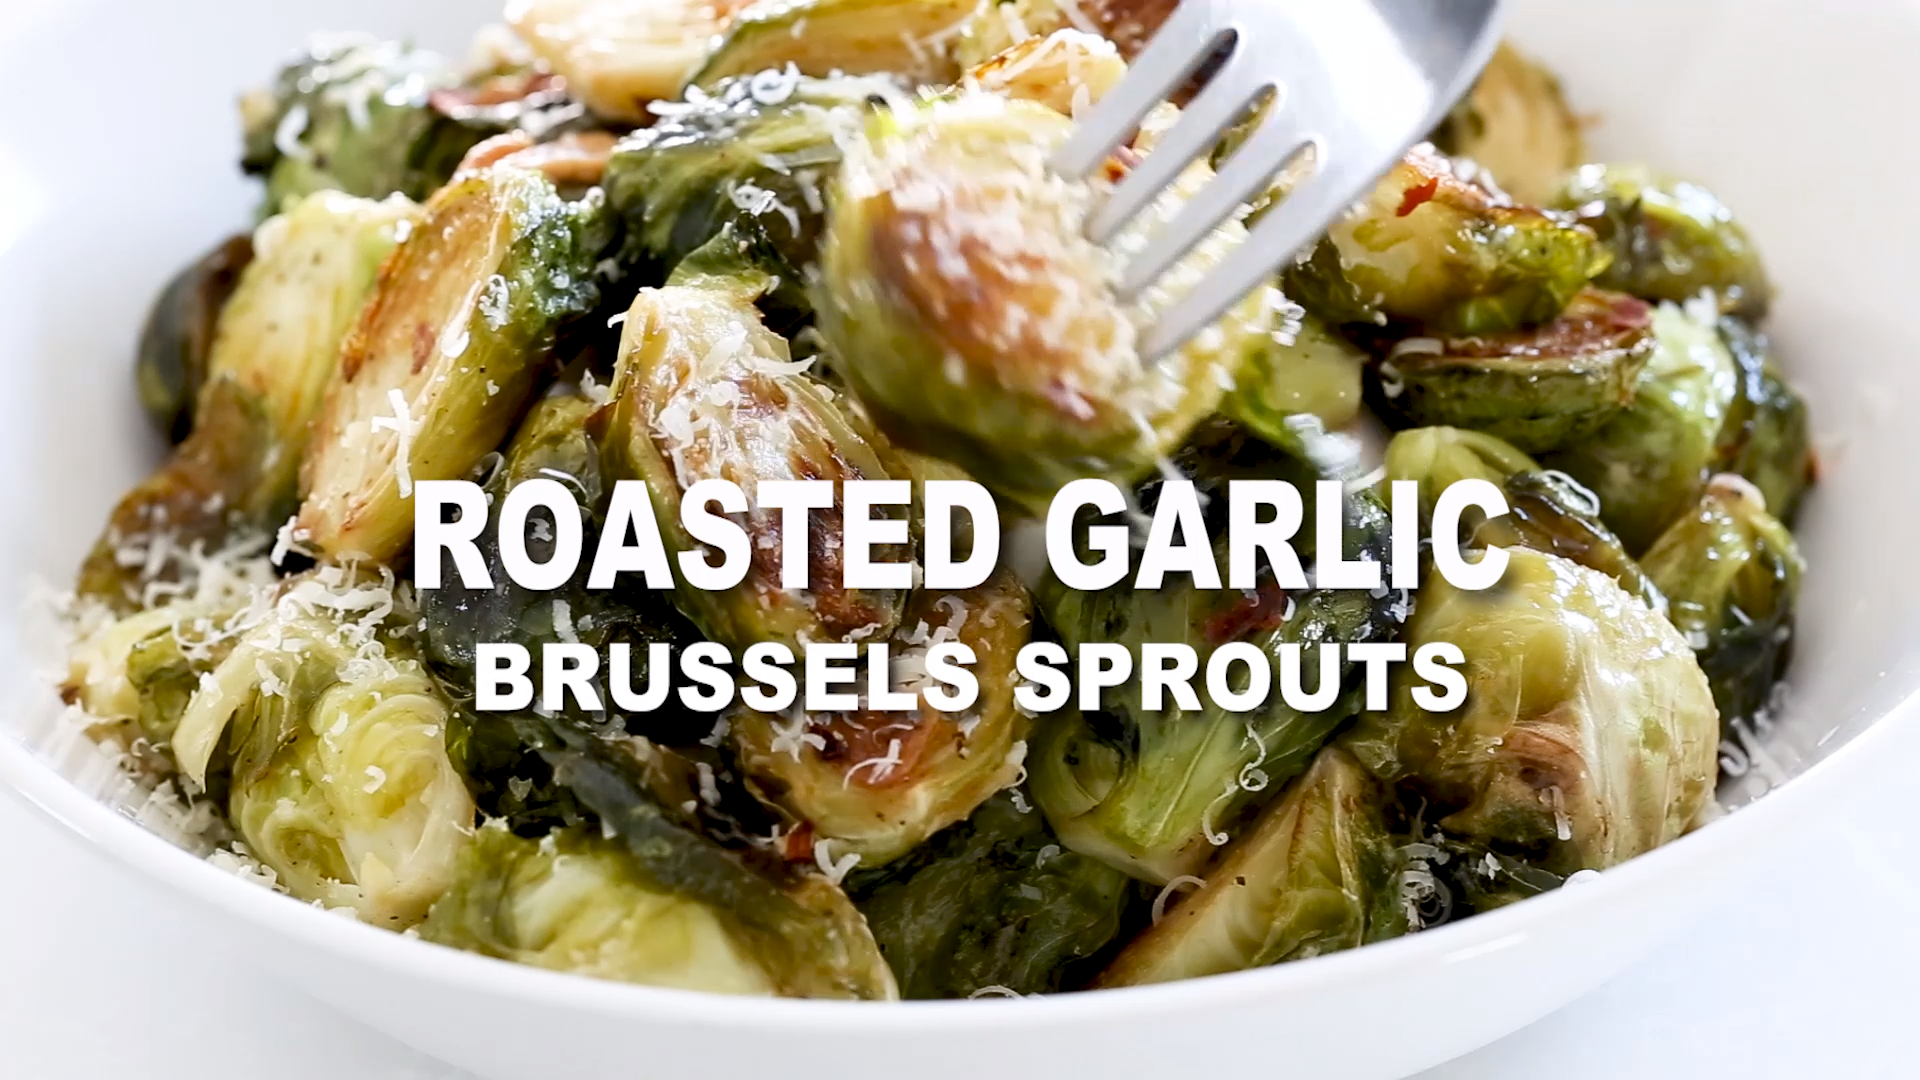 Roasted Garlic Brussels Sprouts - Roasted Garlic Brussels Sprouts -   21 thanksgiving recipes side dishes easy ideas